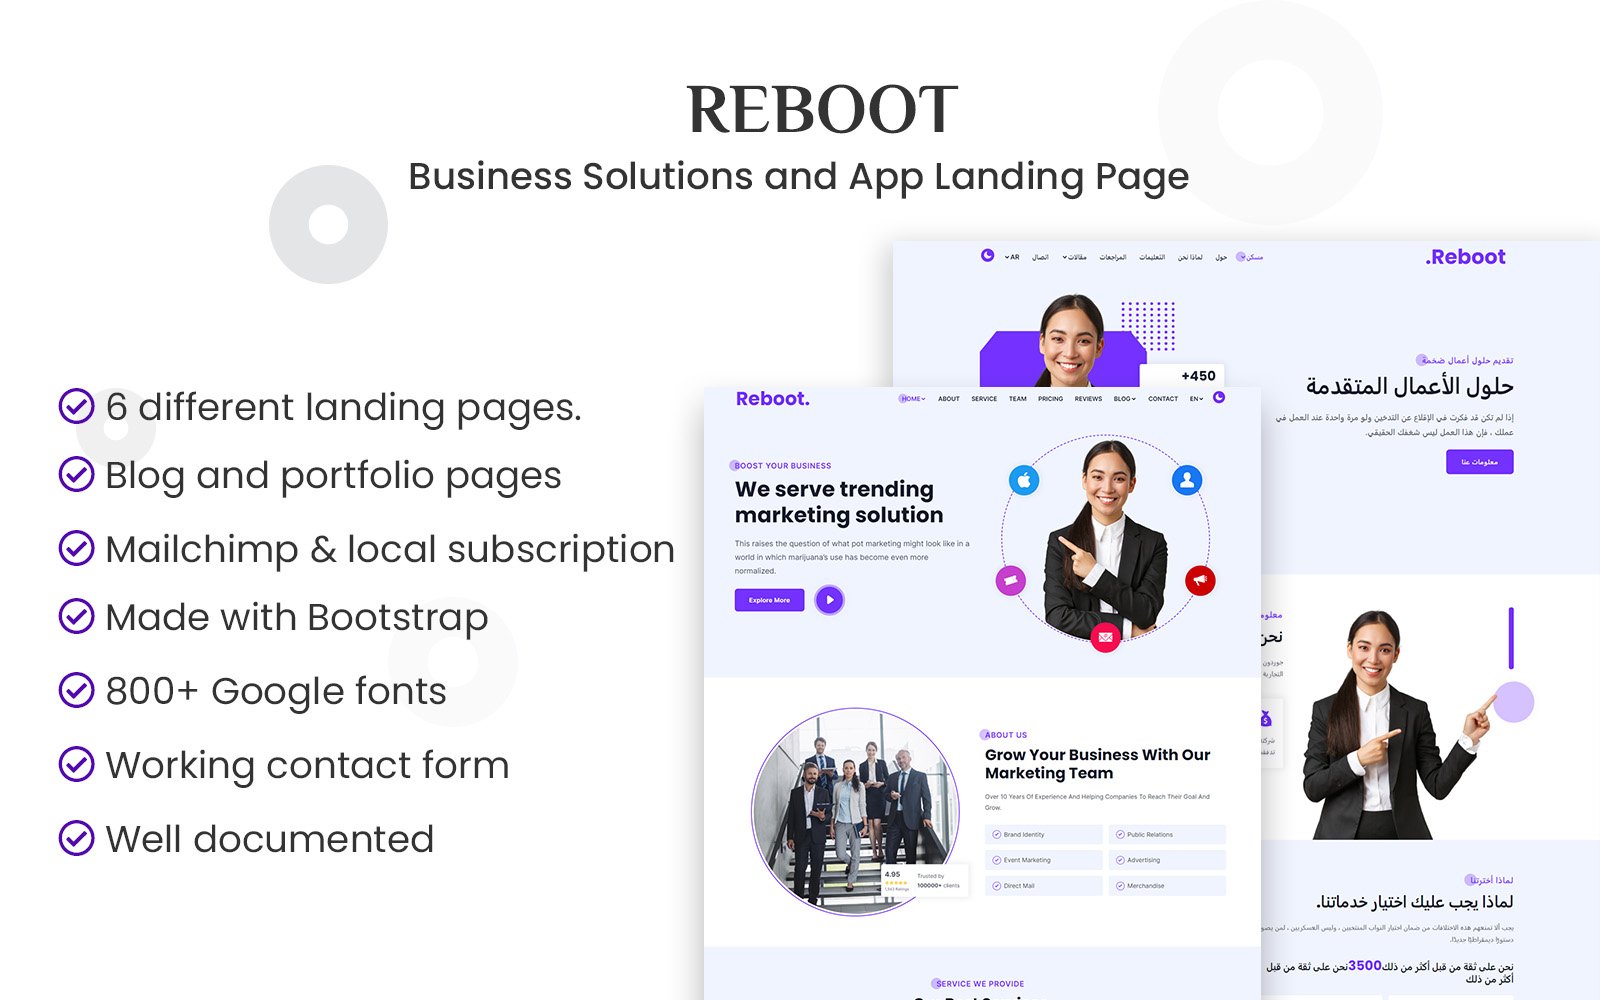 Reboot - Business Solutions and App Landing Page